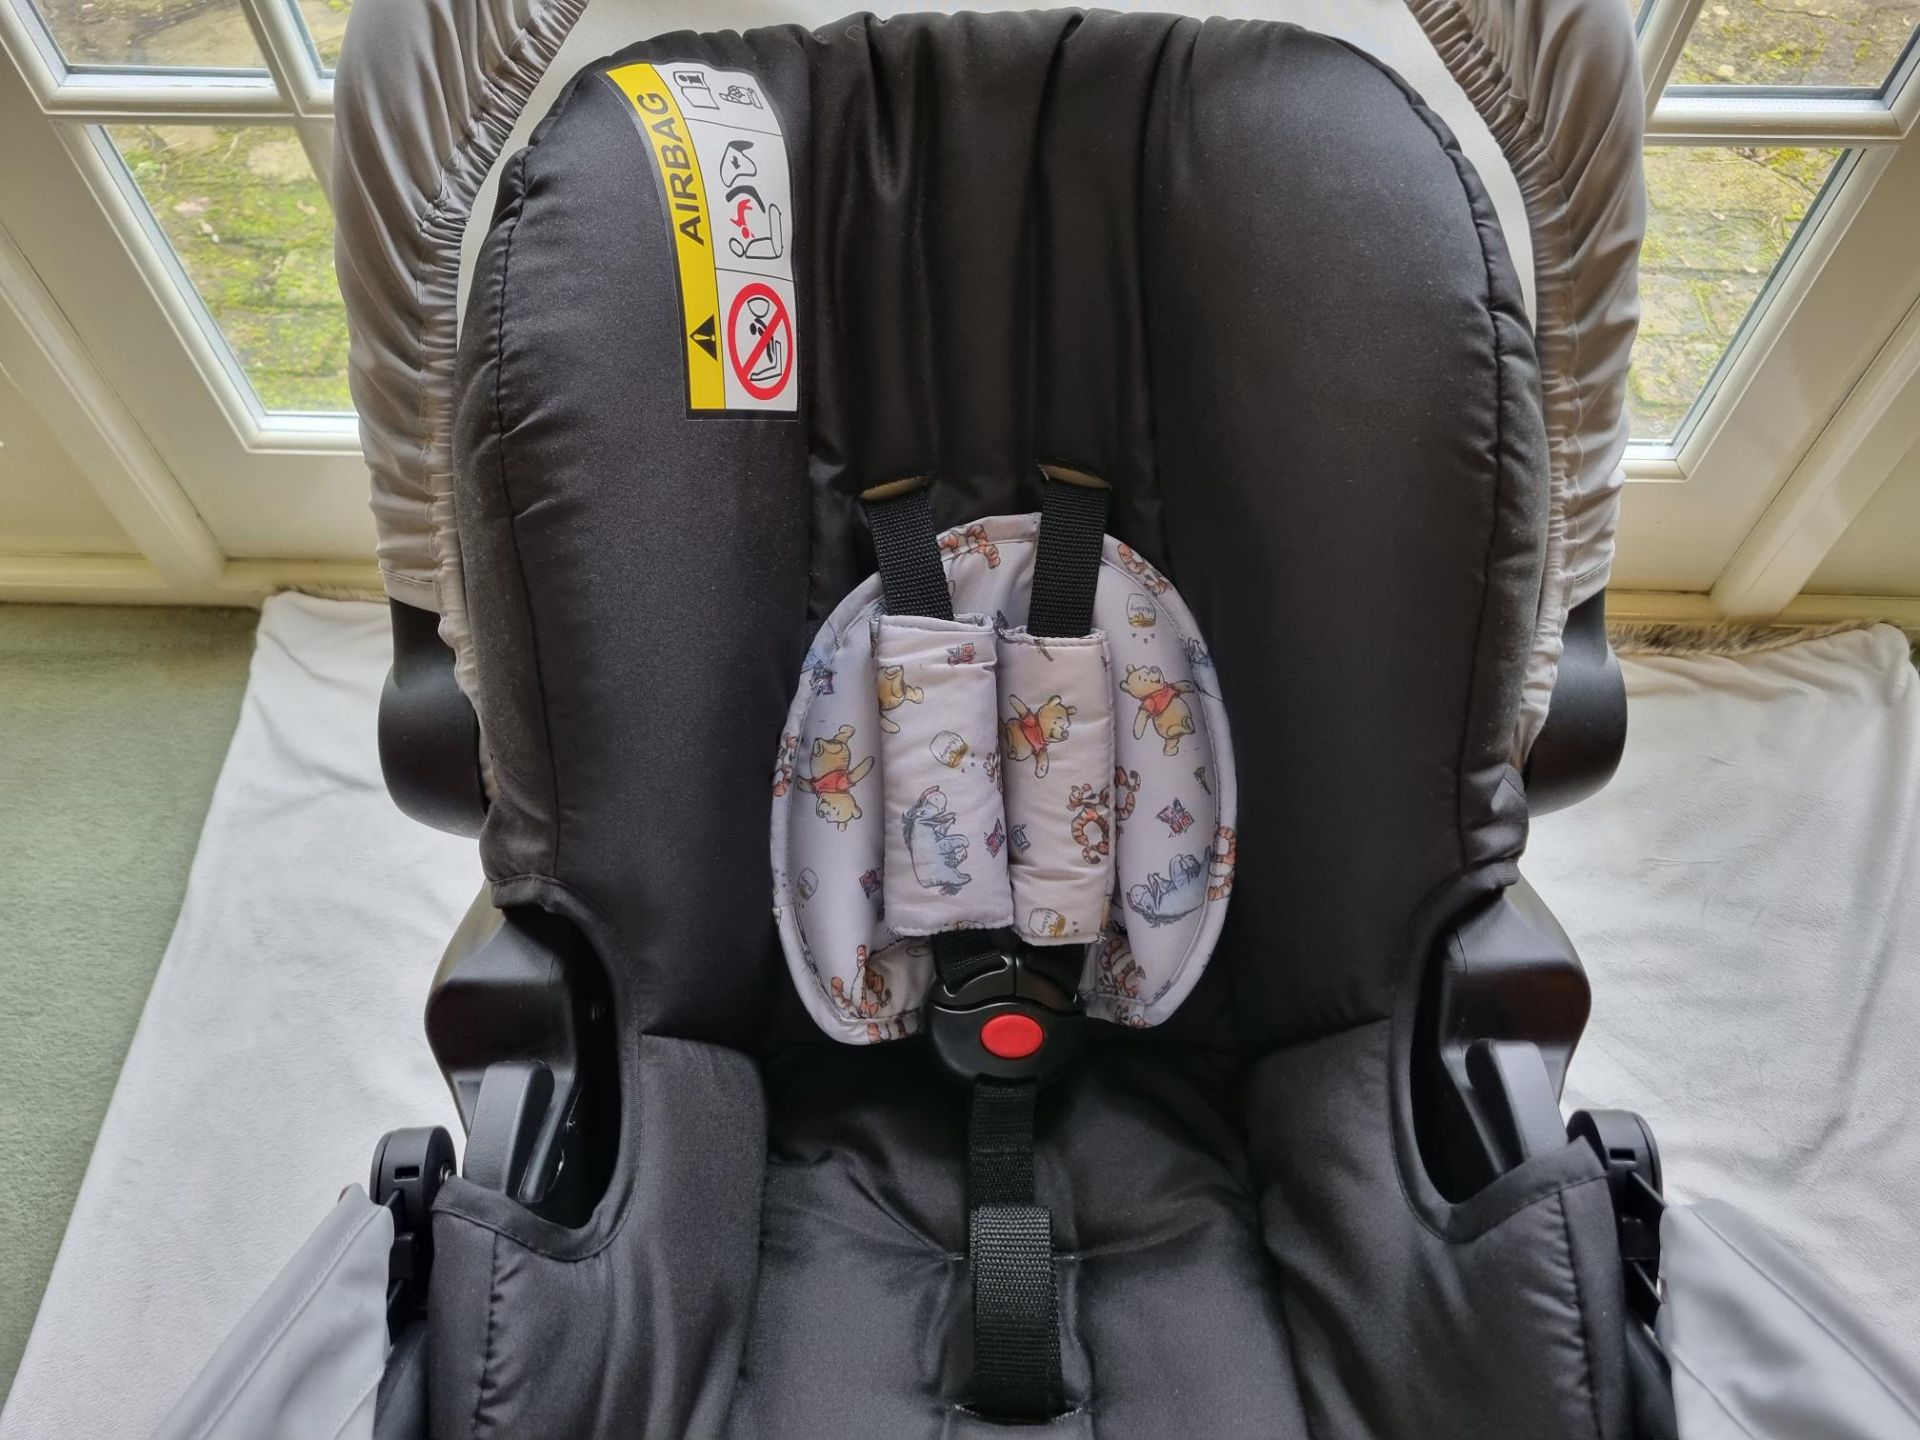 Hauck Disney Pushchair Travel System, Highchair, Tommee Tippee bottle warmer and case, playmat, toys - Image 11 of 24